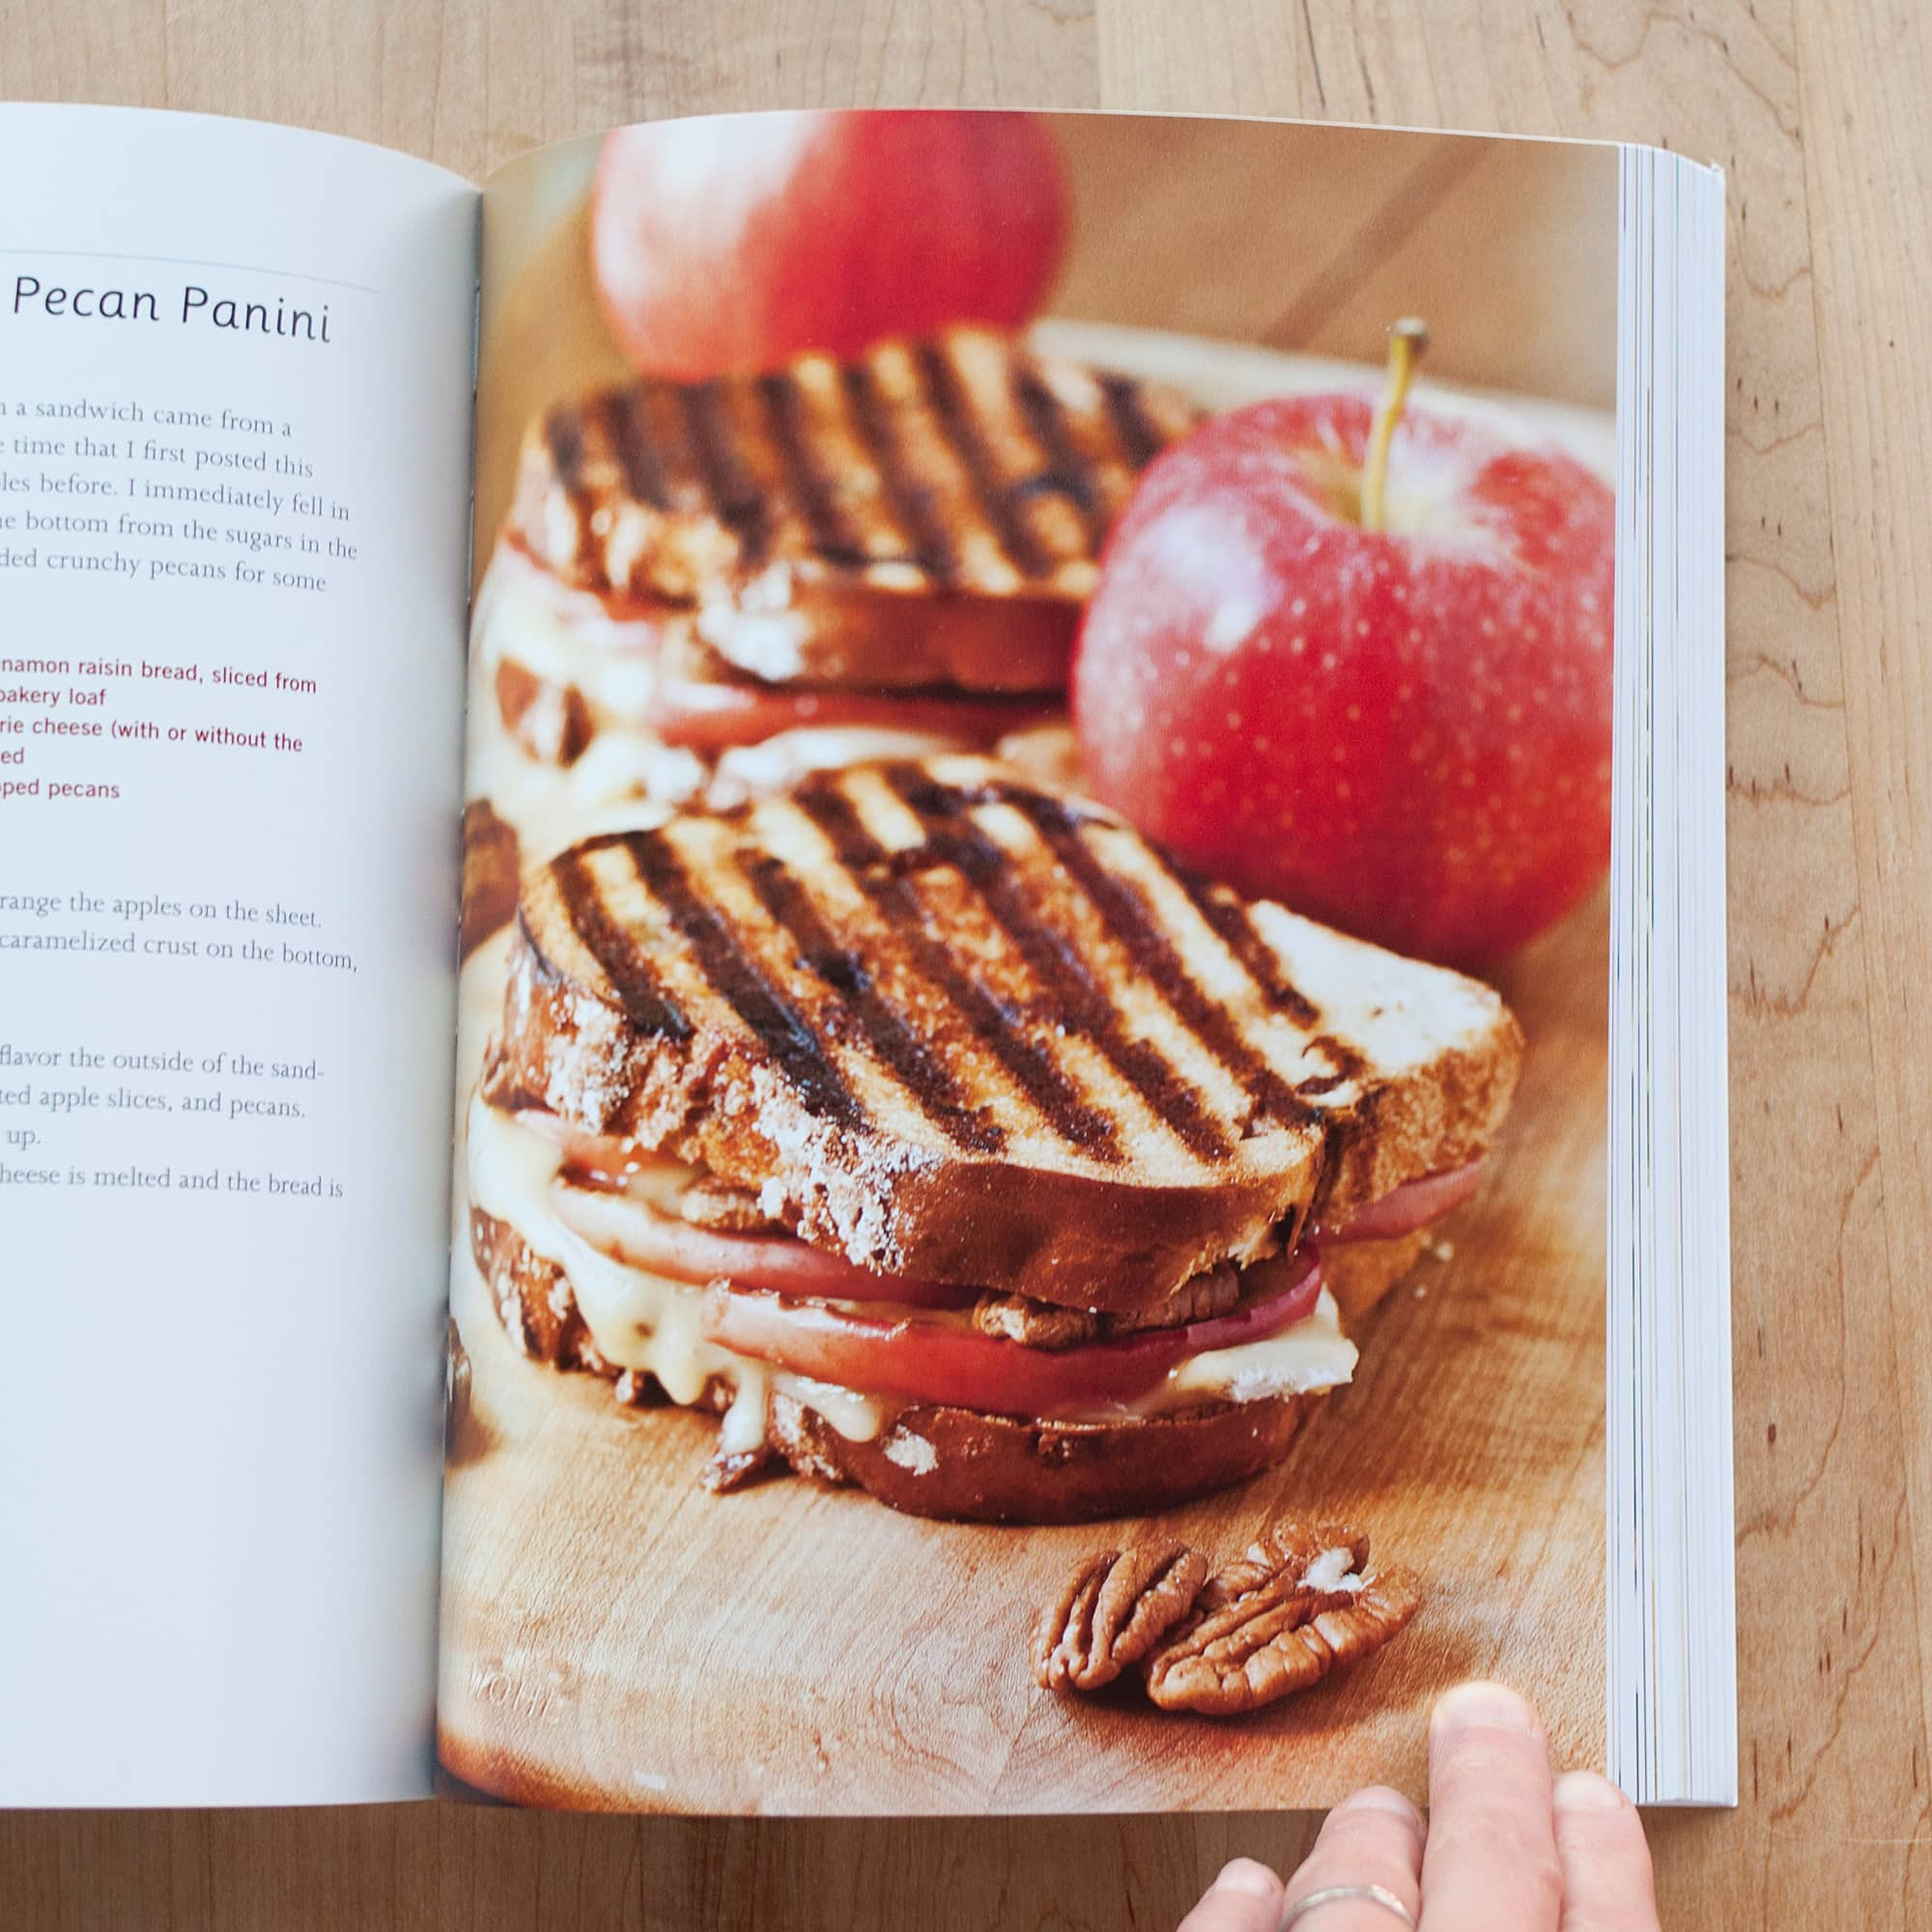 Panini Recipes Book
 The Ultimate Panini Press Cookbook by Kathy Strahs